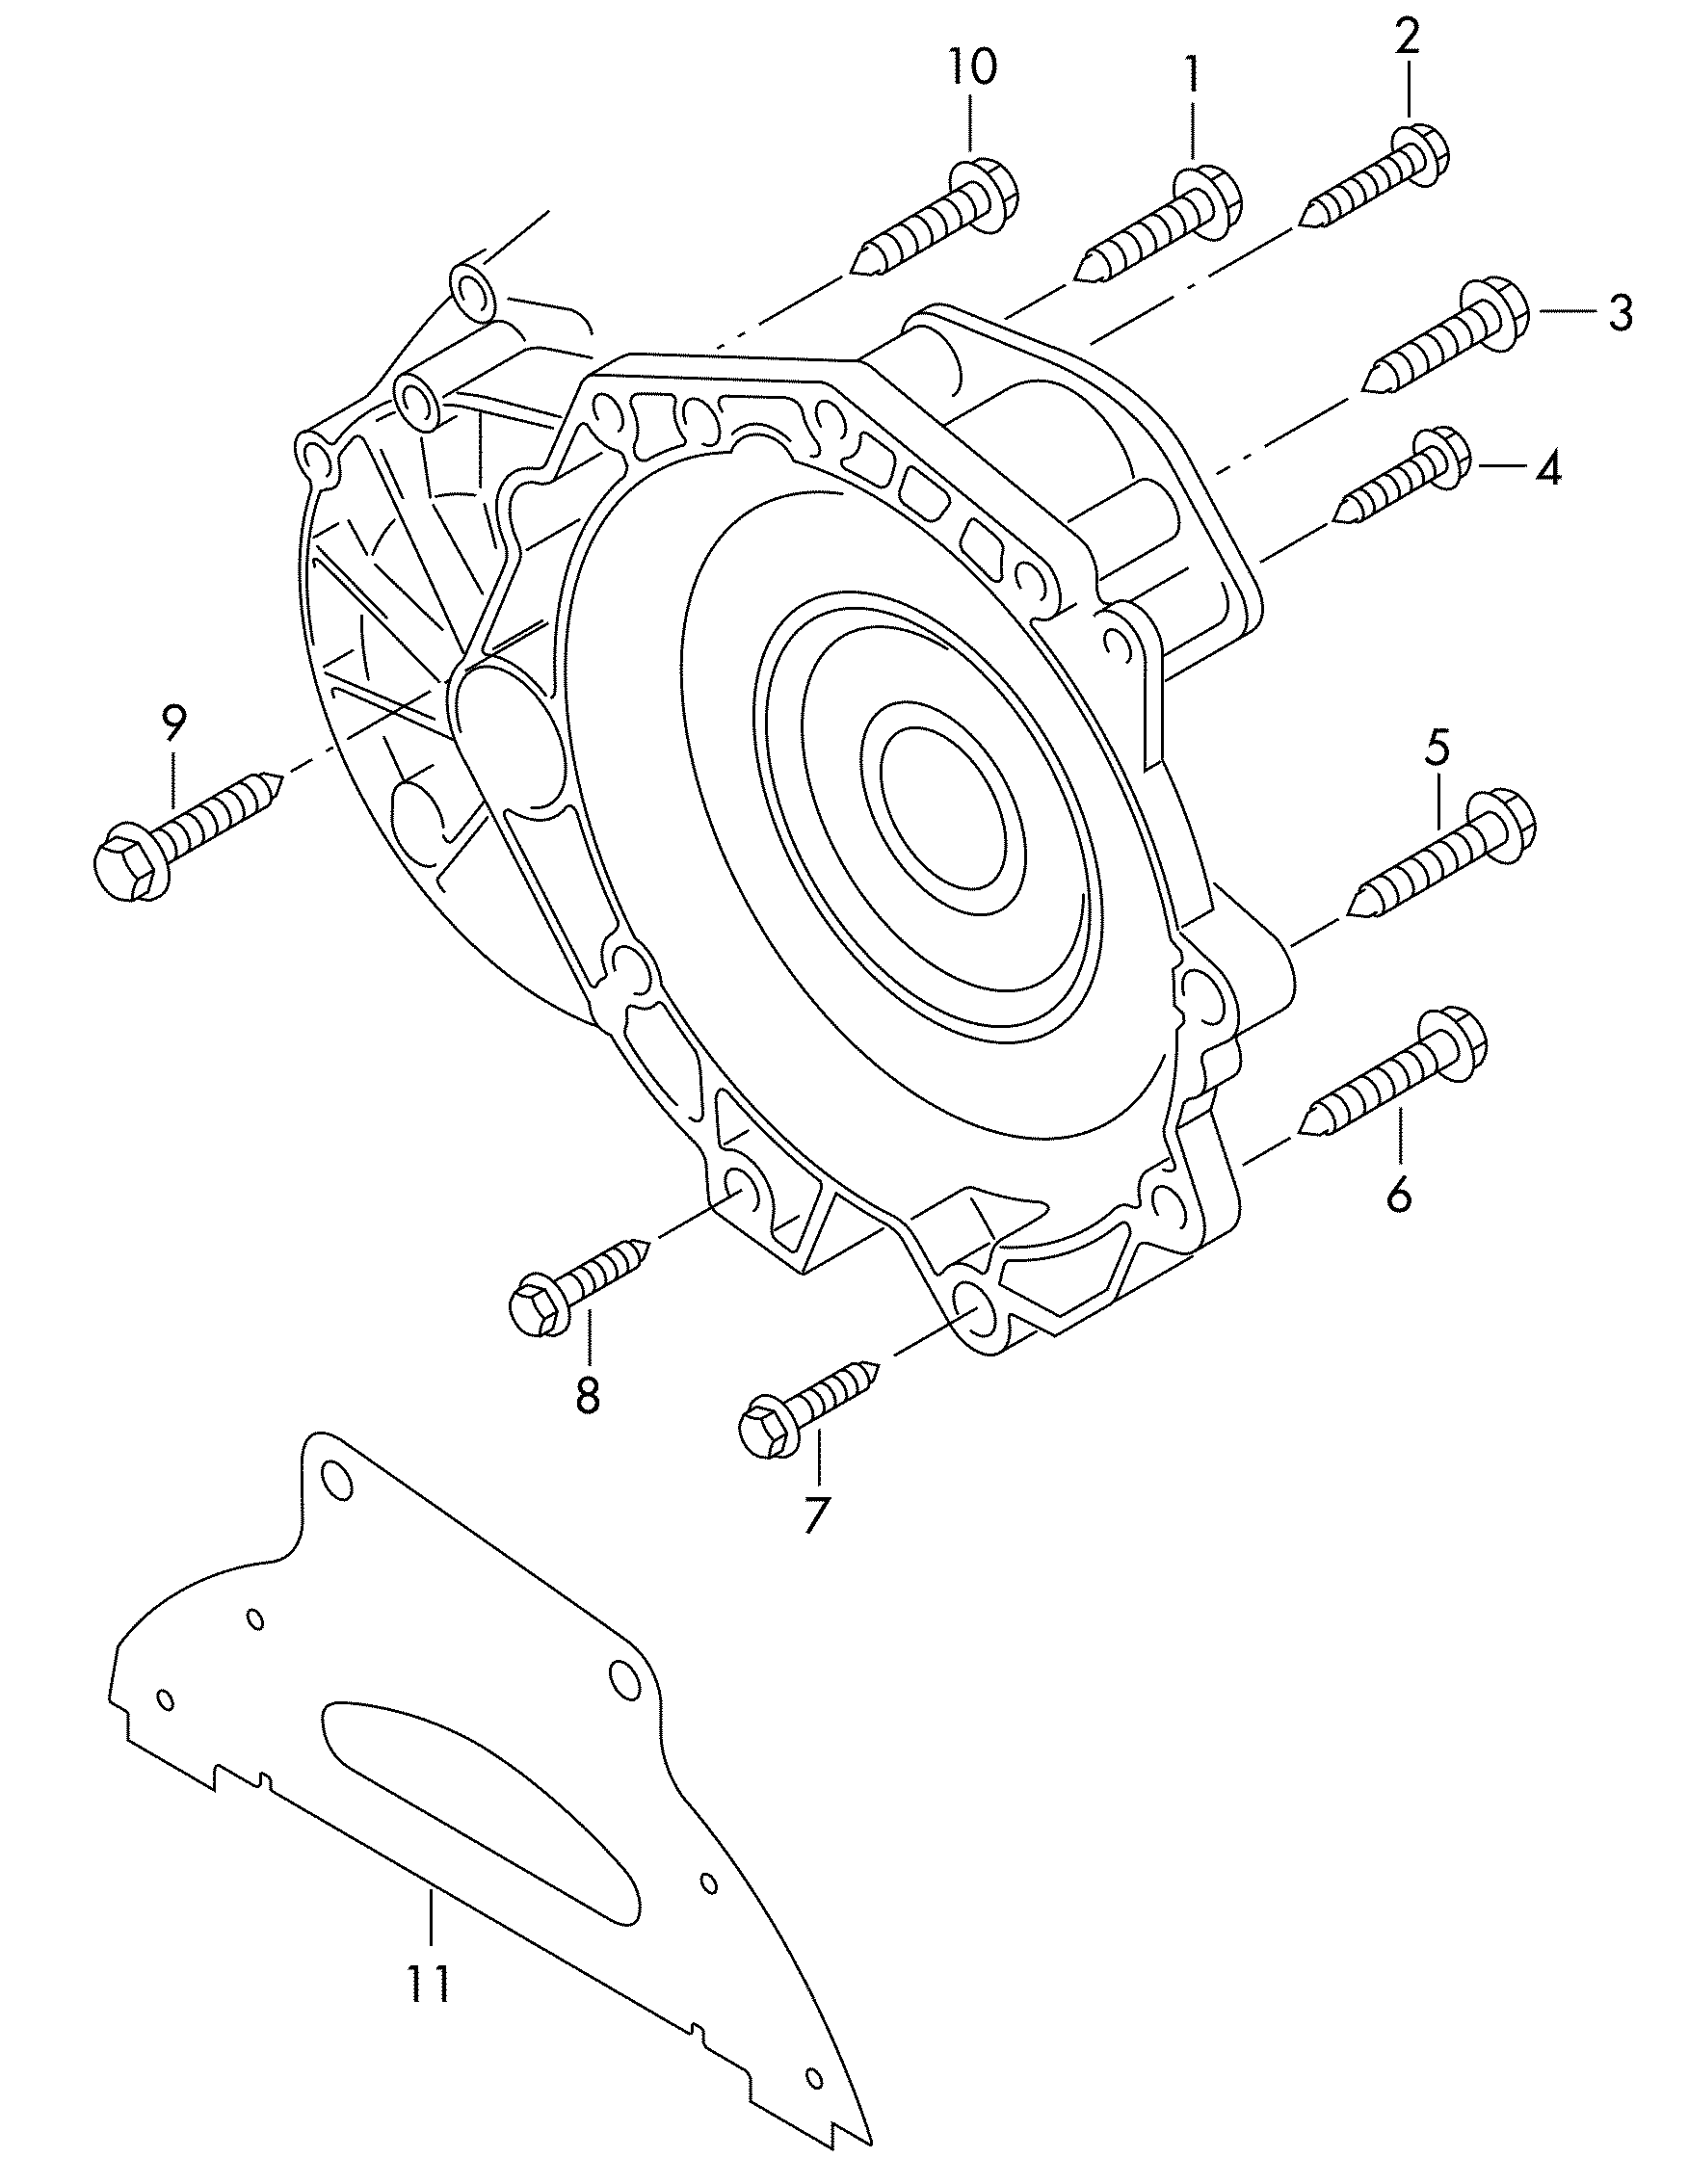 mounting parts for engine and<br>transmissionFor 7-speed dual clutch<br>gearbox  - Octavia - oct